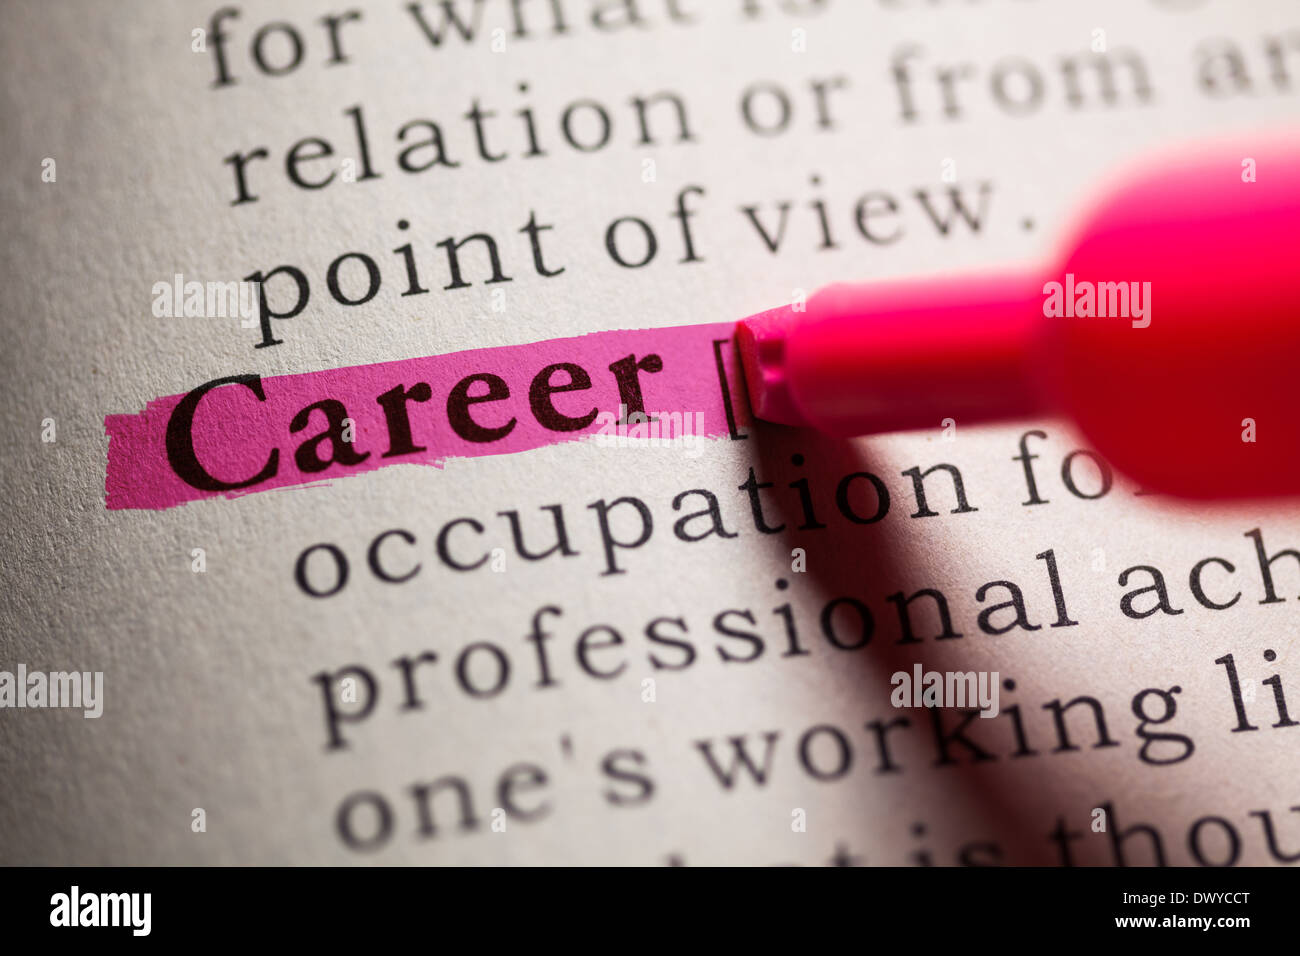 Fake Dictionary, definition of the word Career. Stock Photo